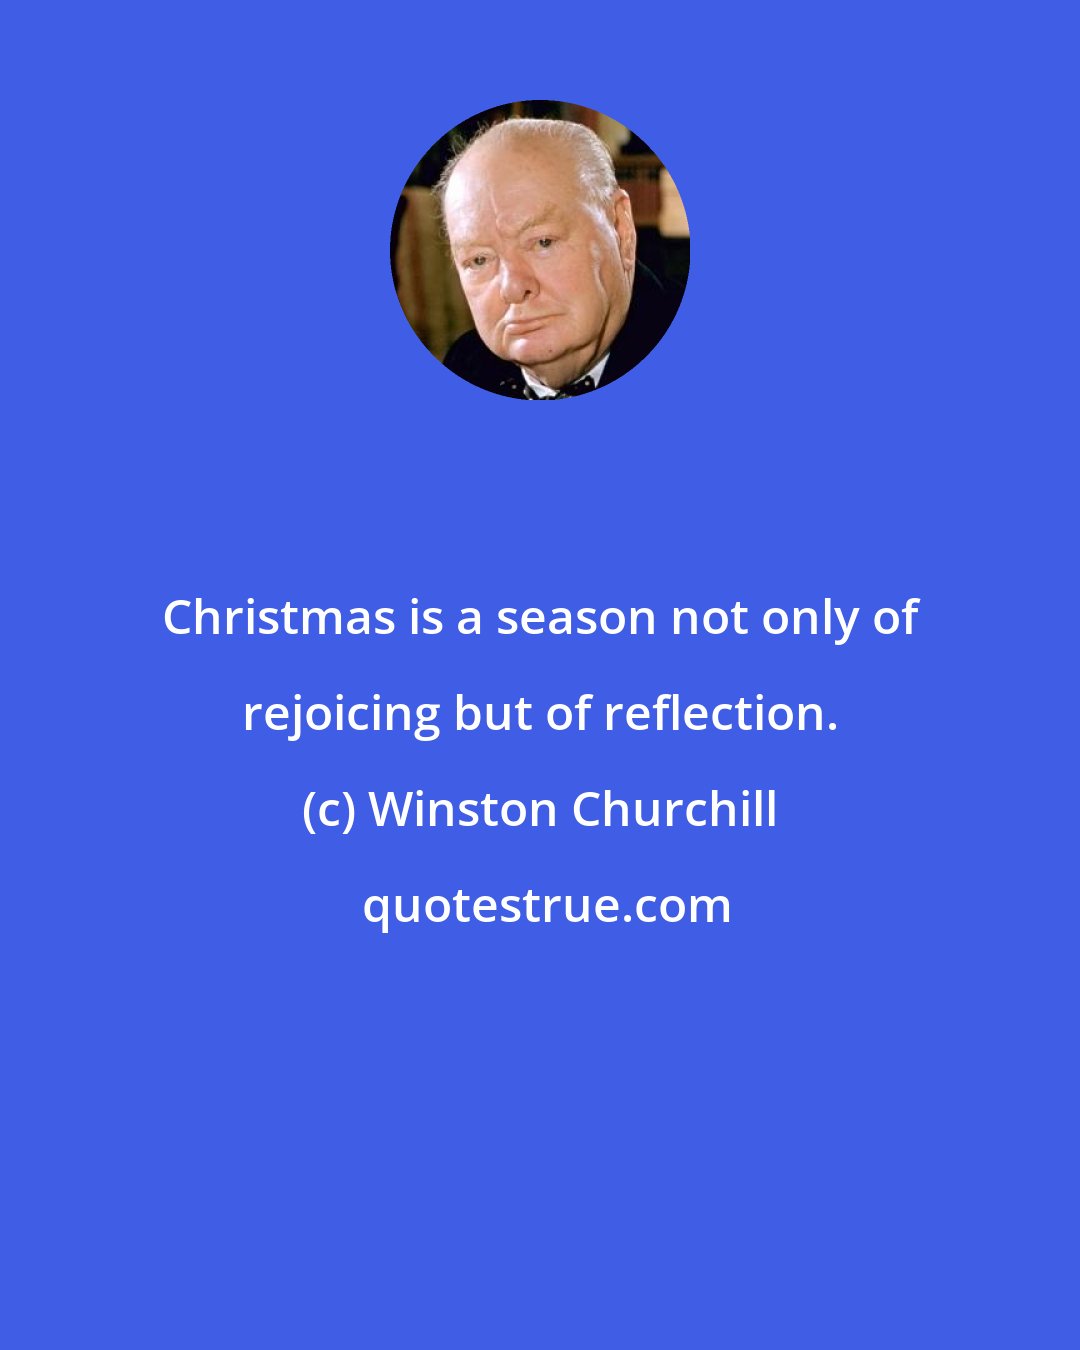 Winston Churchill: Christmas is a season not only of rejoicing but of reflection.